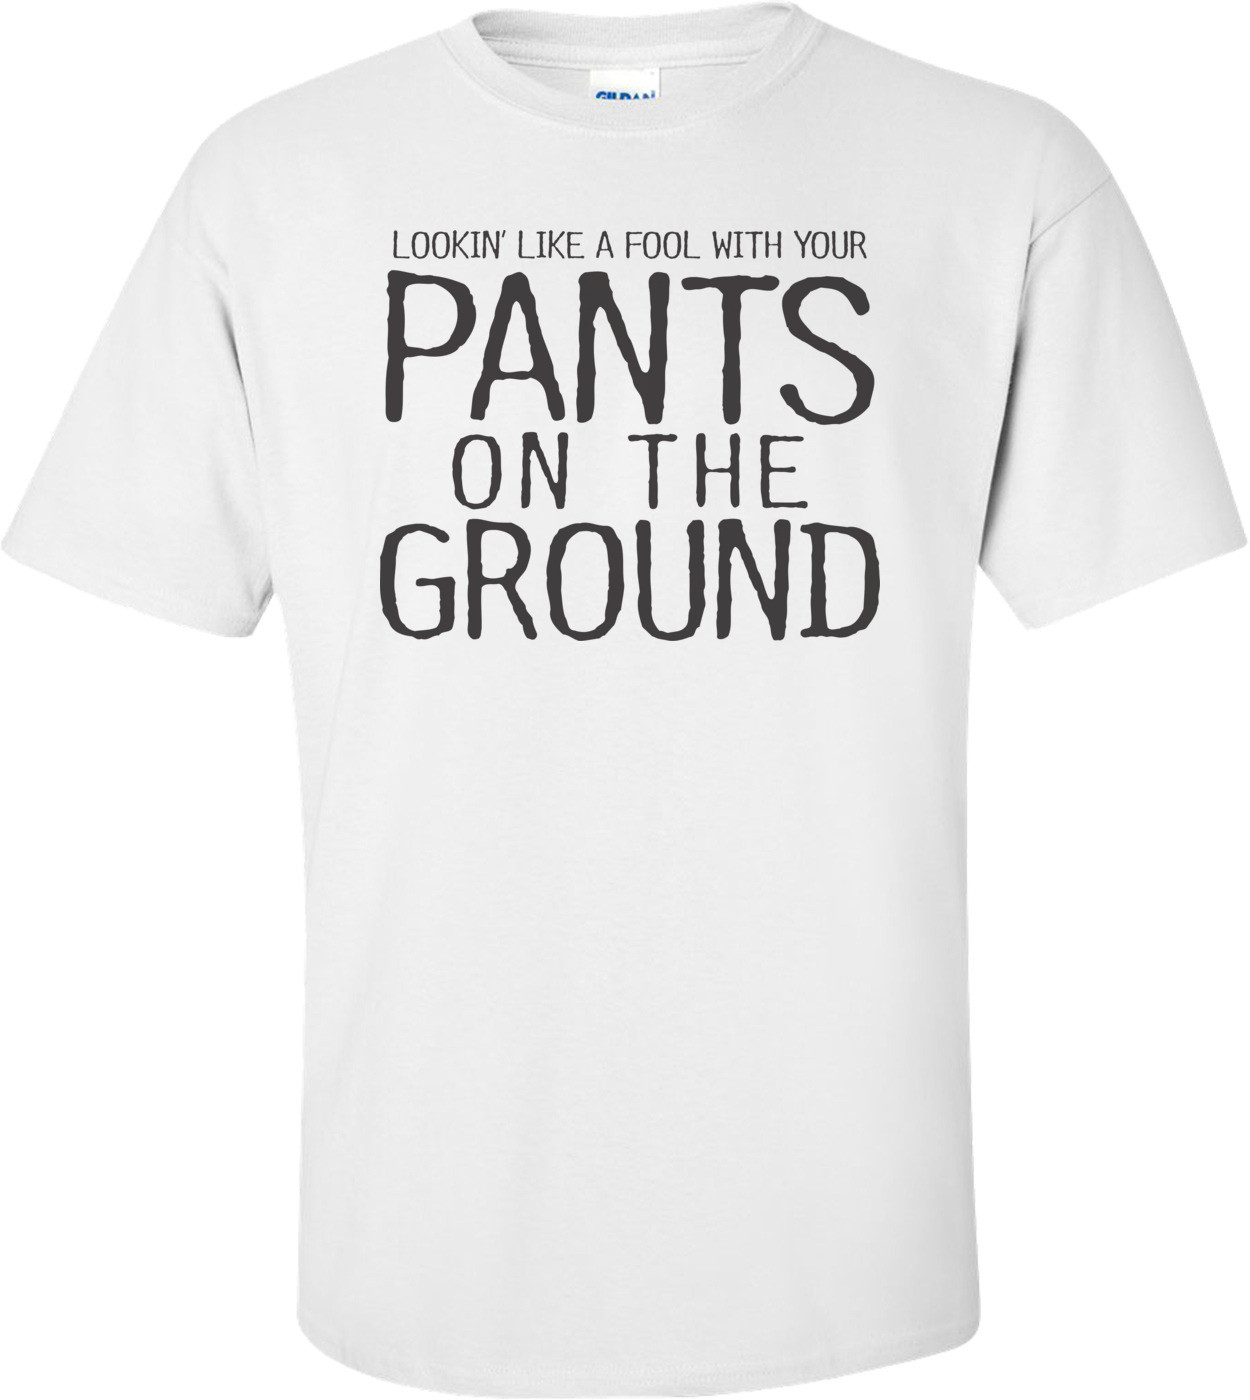 Pants On The Ground T-shirt